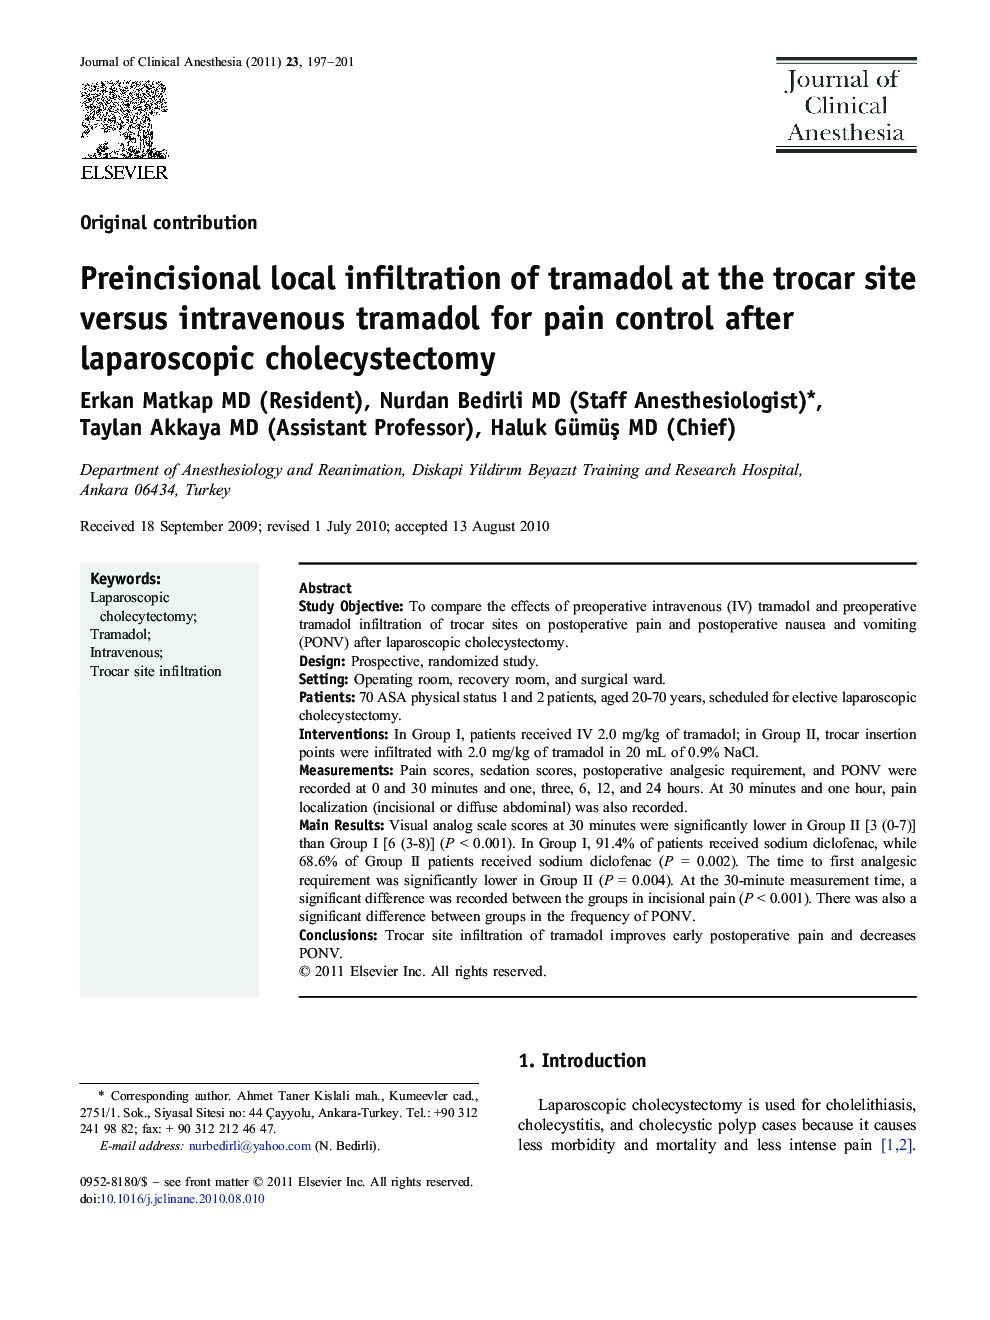 Preincisional local infiltration of tramadol at the trocar site versus intravenous tramadol for pain control after laparoscopic cholecystectomy